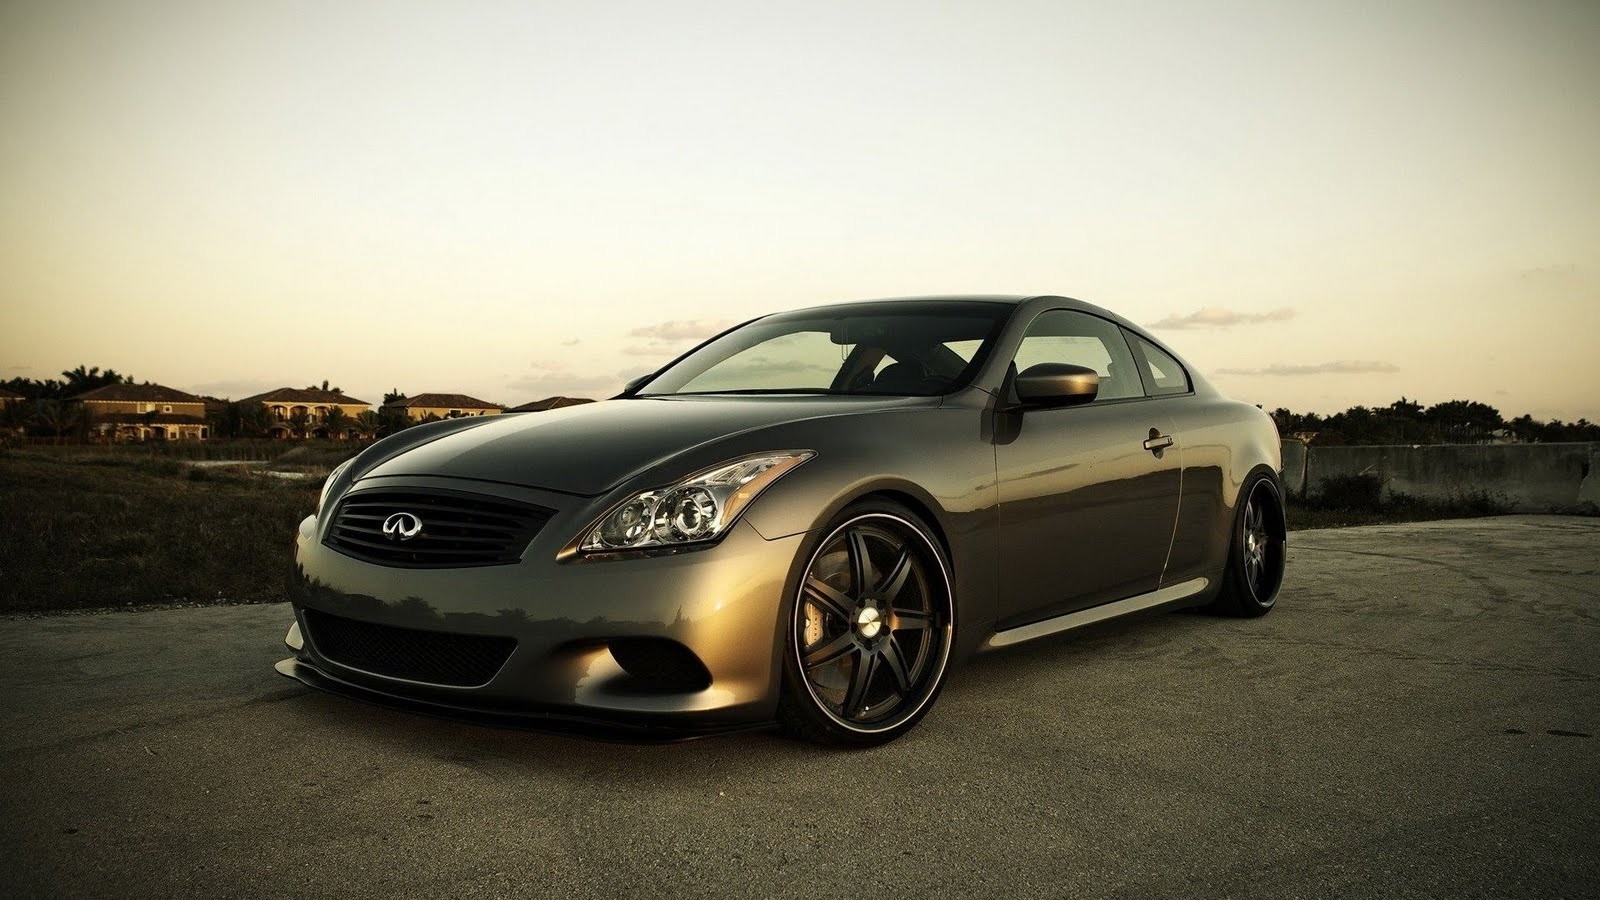 vehicles, infiniti cell phone wallpapers